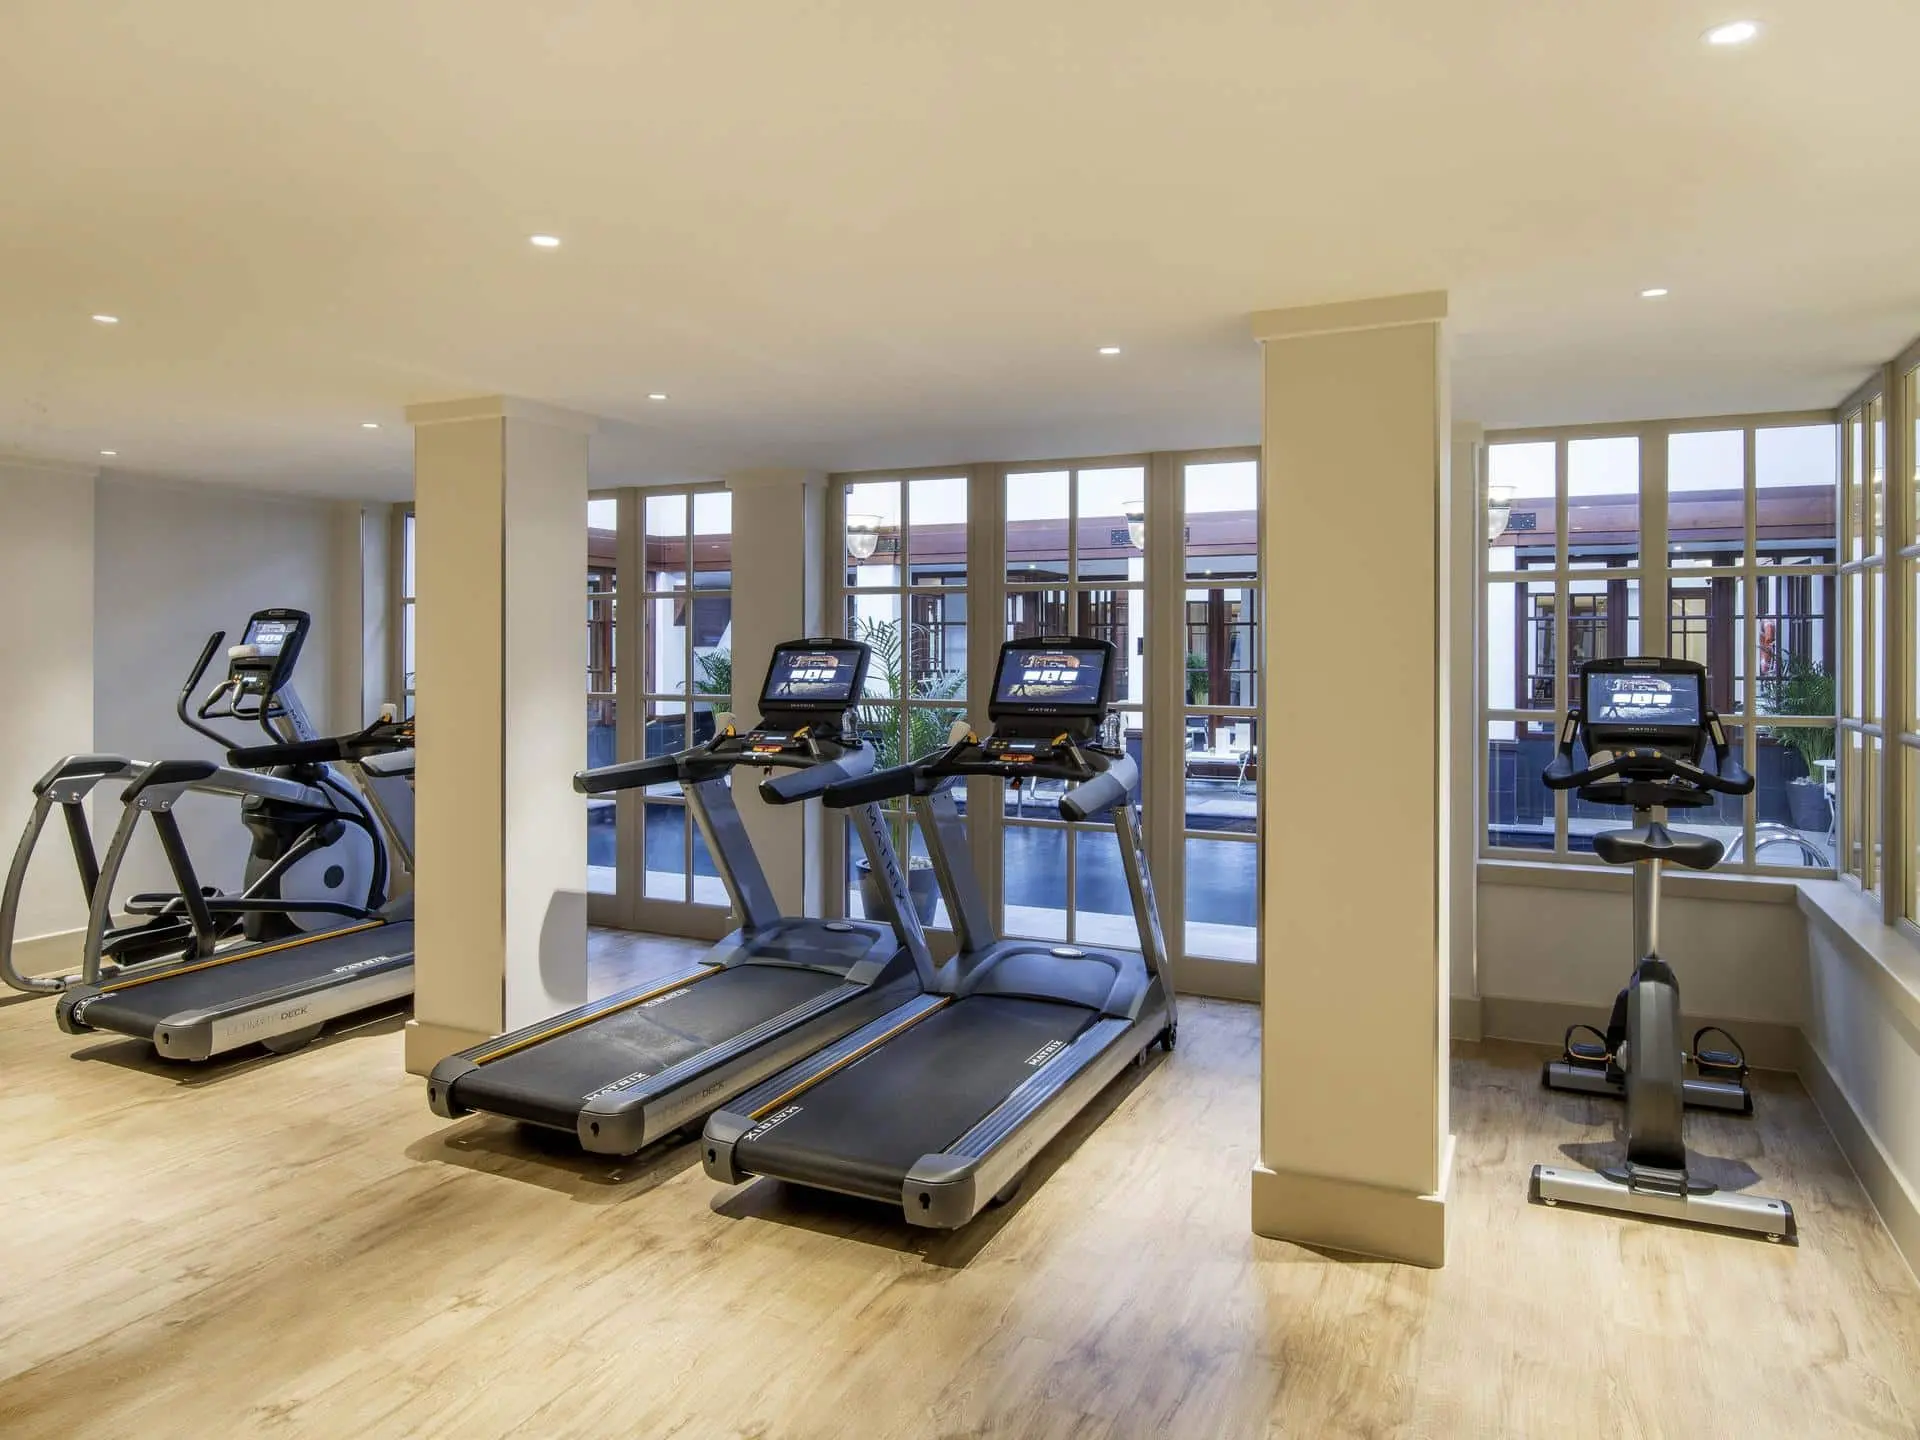 The Savoy_London_Fitness Centre 01_VIP Trips for Kids